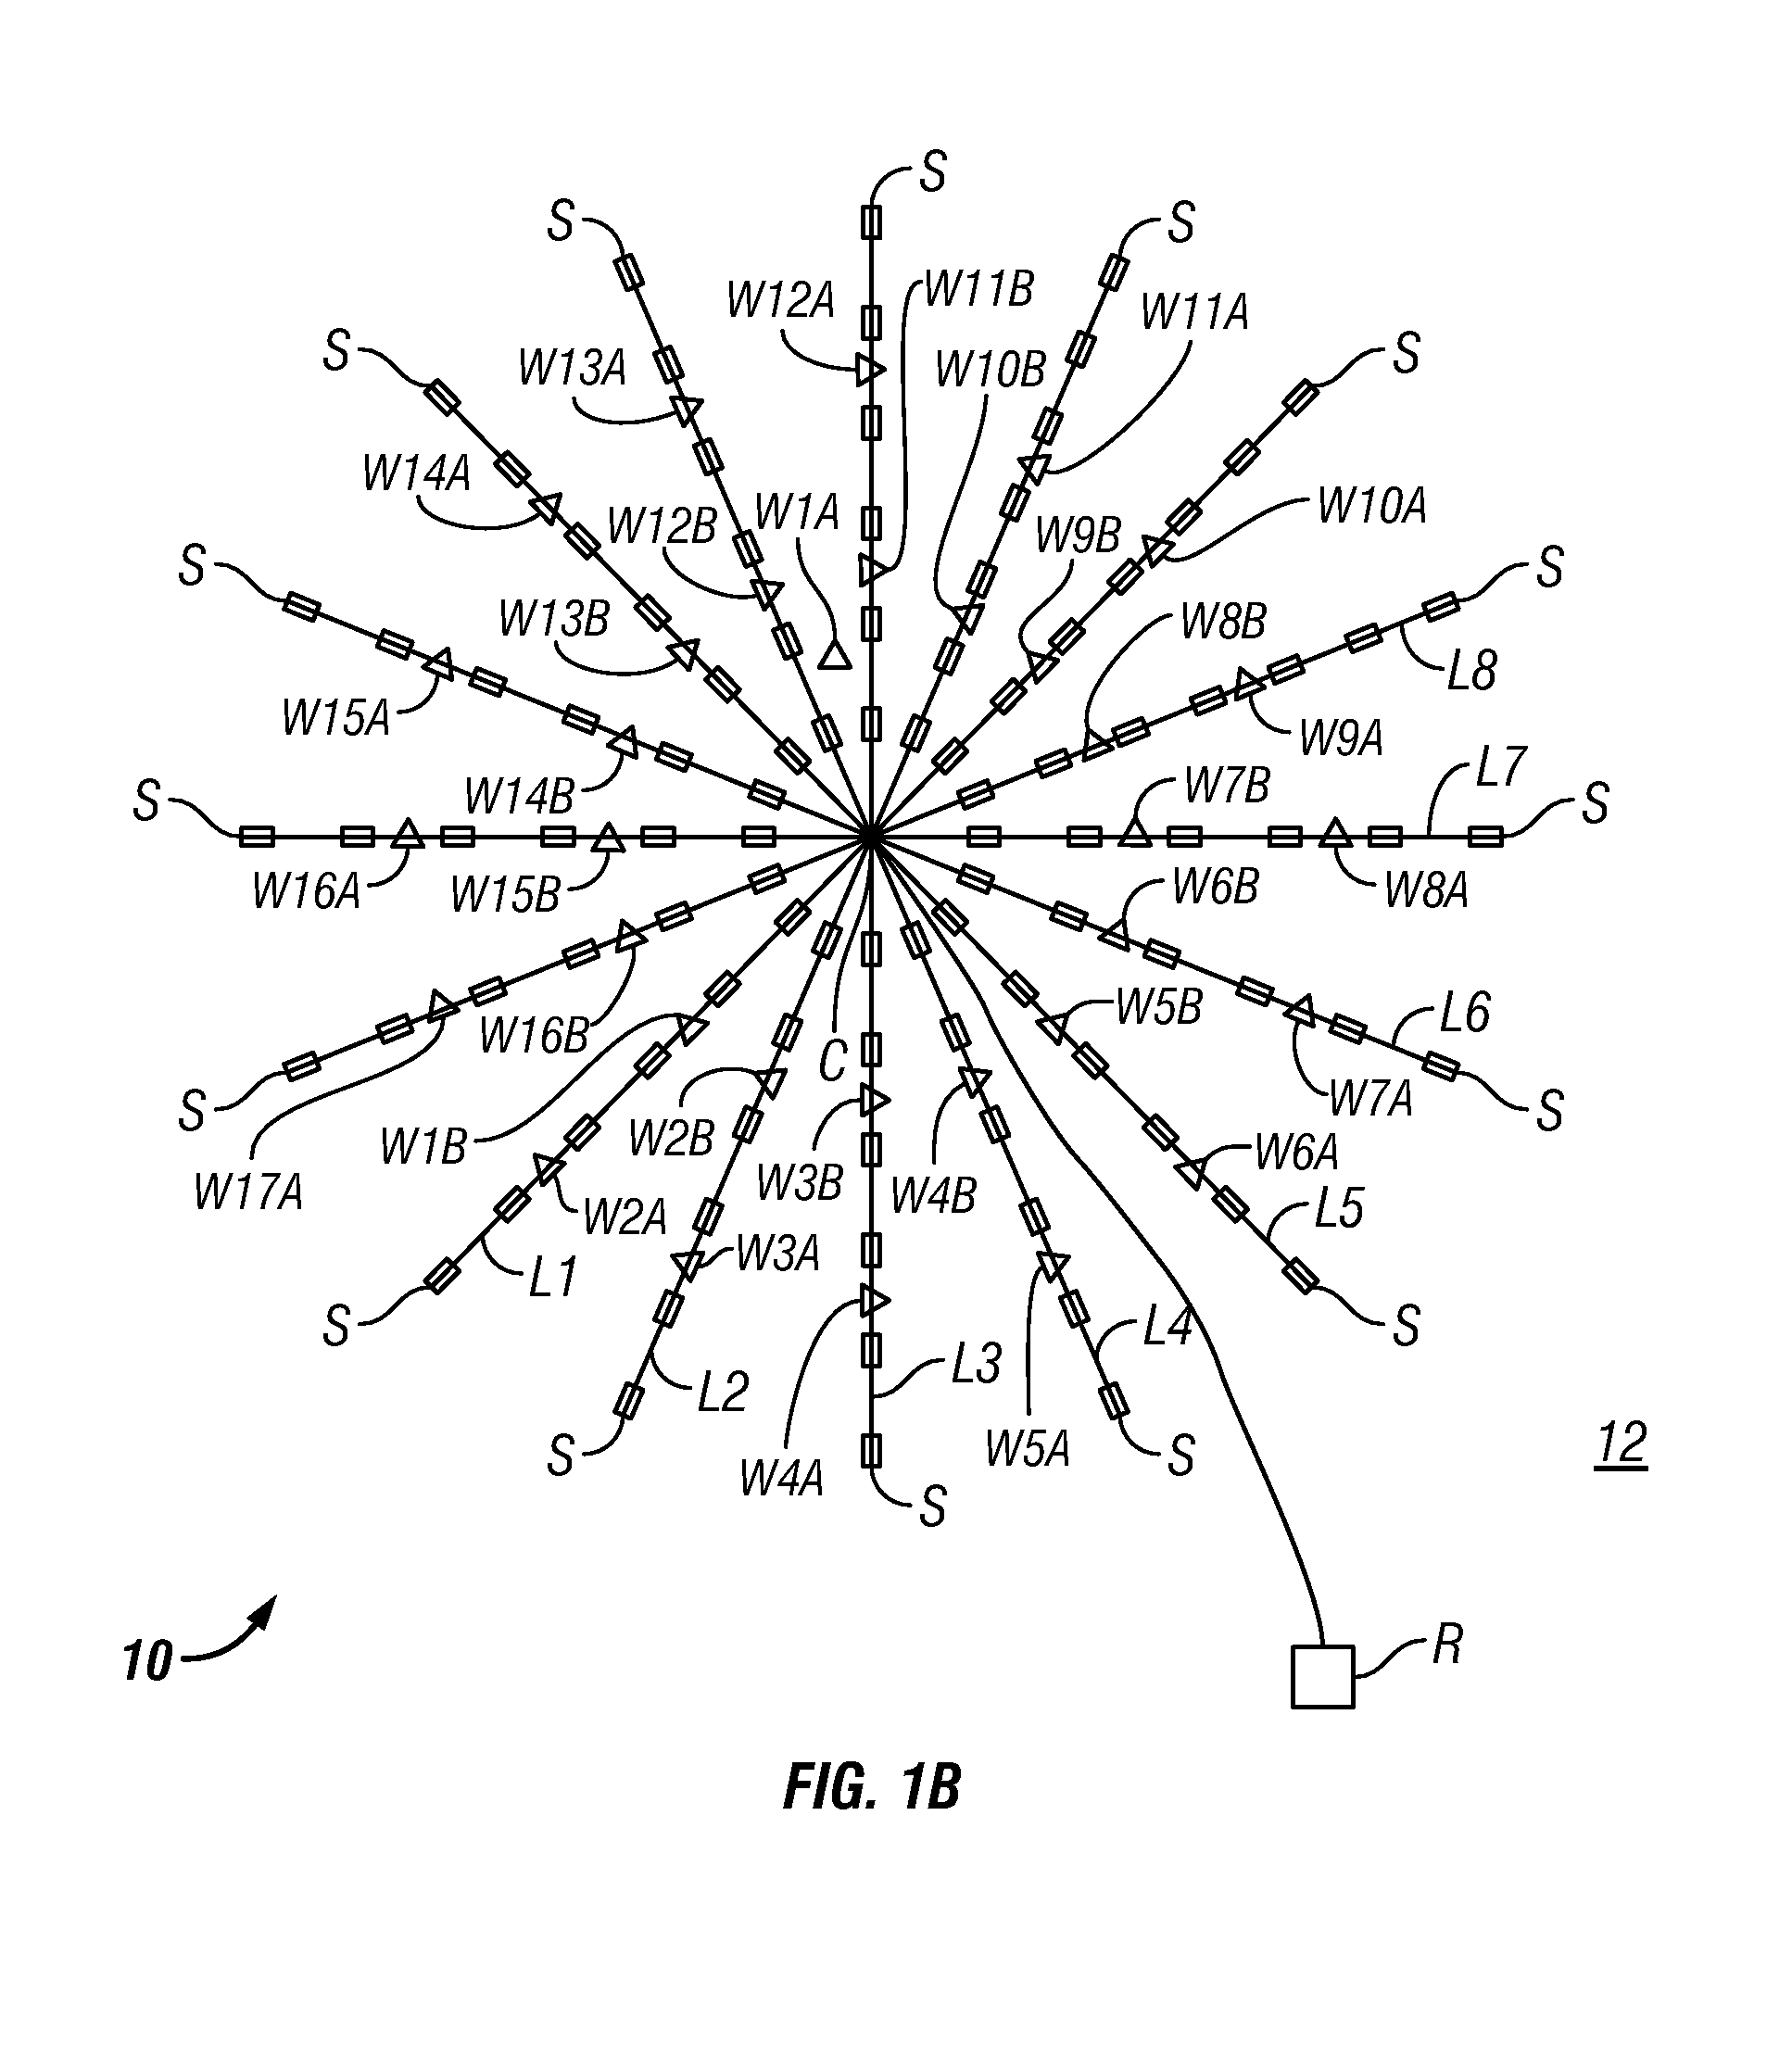 Method for acoustic imaging of the earth's subsurface using a fixed position sensor array and beam steering